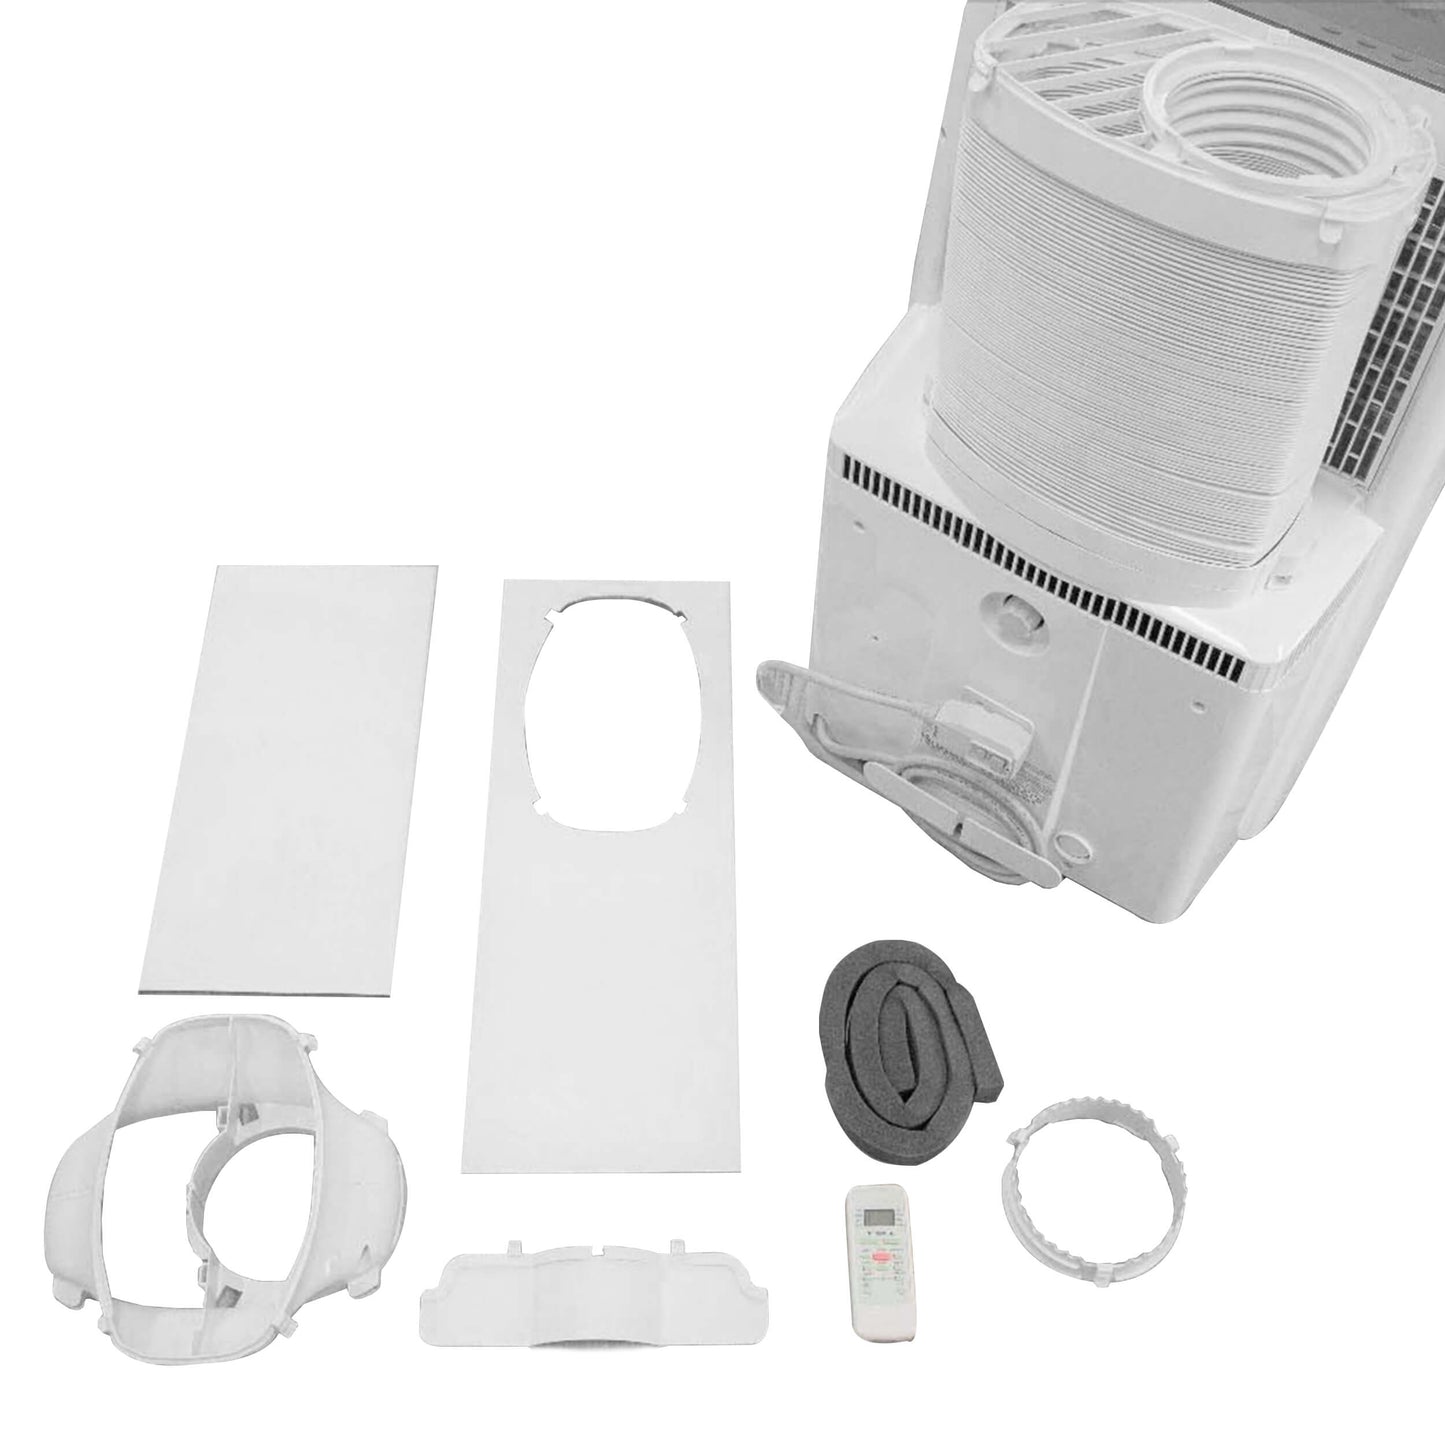 Whynter Air Conditioners Whynter ARC-1230WNH 14,000 BTU (12,000 BTU SACC) NEX Inverter Dual Hose Cooling Portable Air Conditioner, Heater, Dehumidifier, and Fan with Smart Wi-Fi, up to 600 sq ft in White